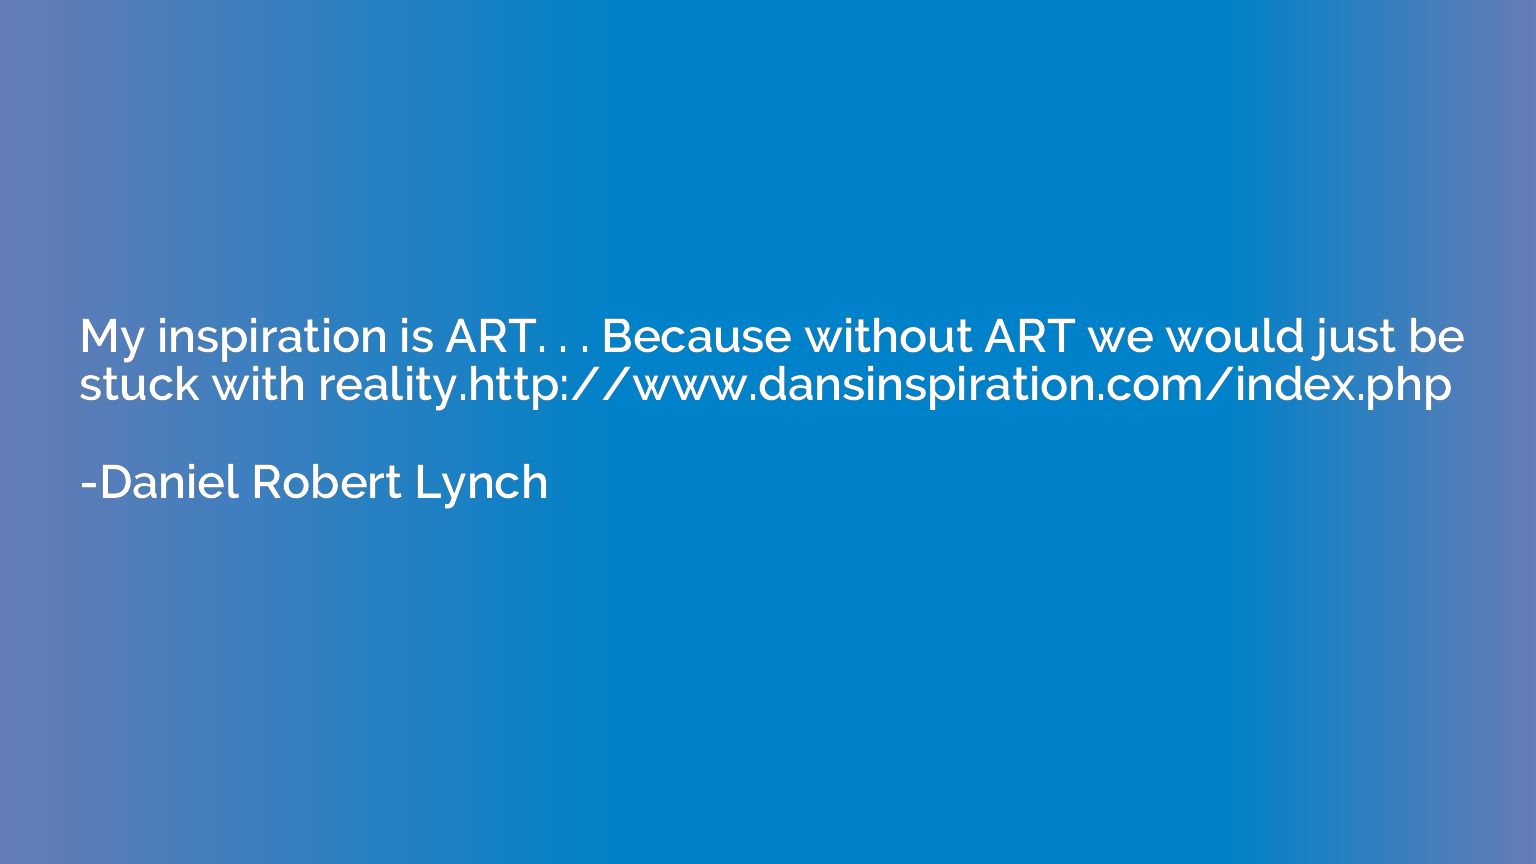 My inspiration is ART. . . Because without ART we would just